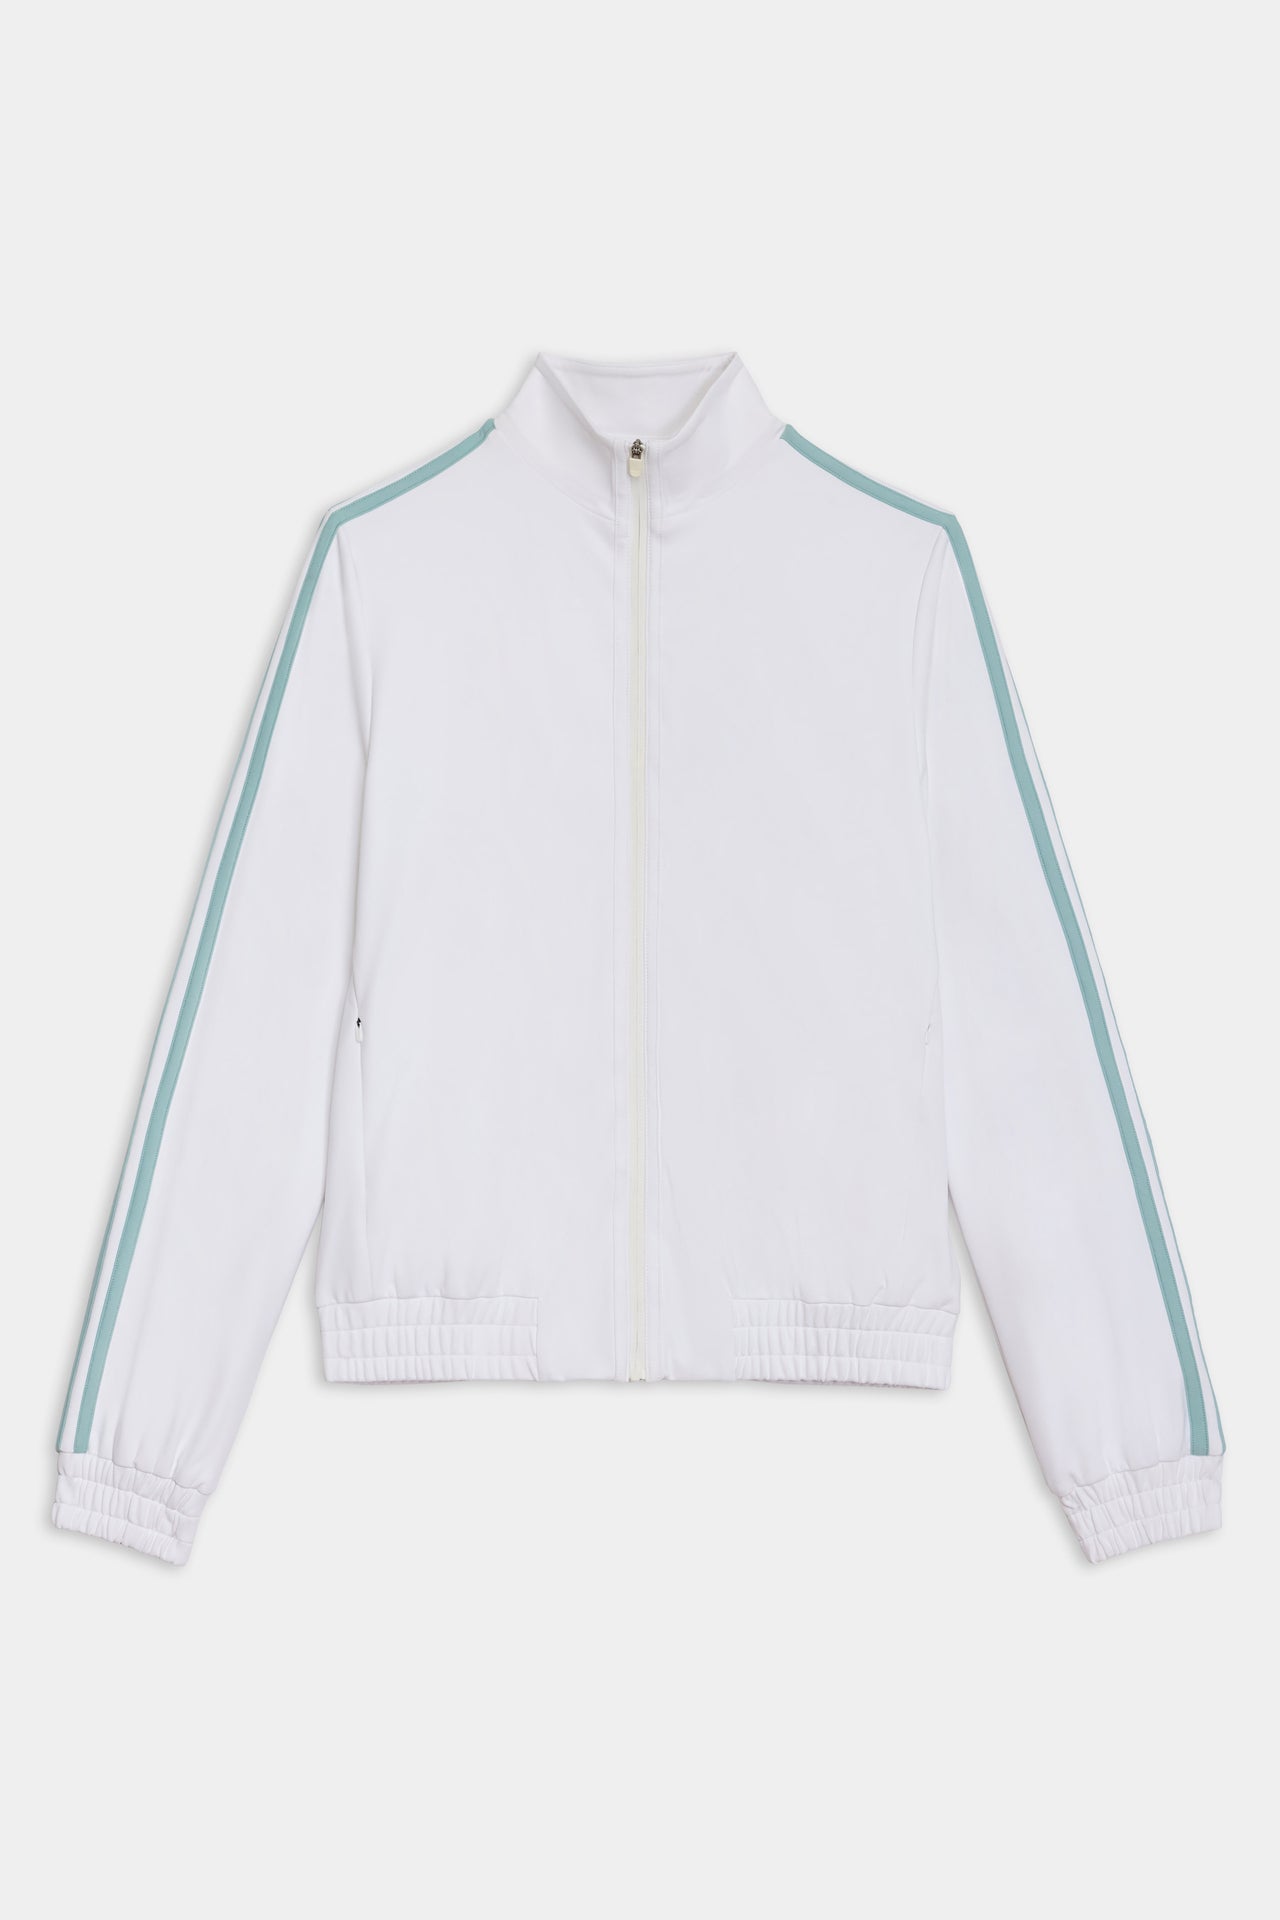 A SPLITS59 Techflex Fox Jacket - White/Teal with a retro vibe and blue and green stripes.